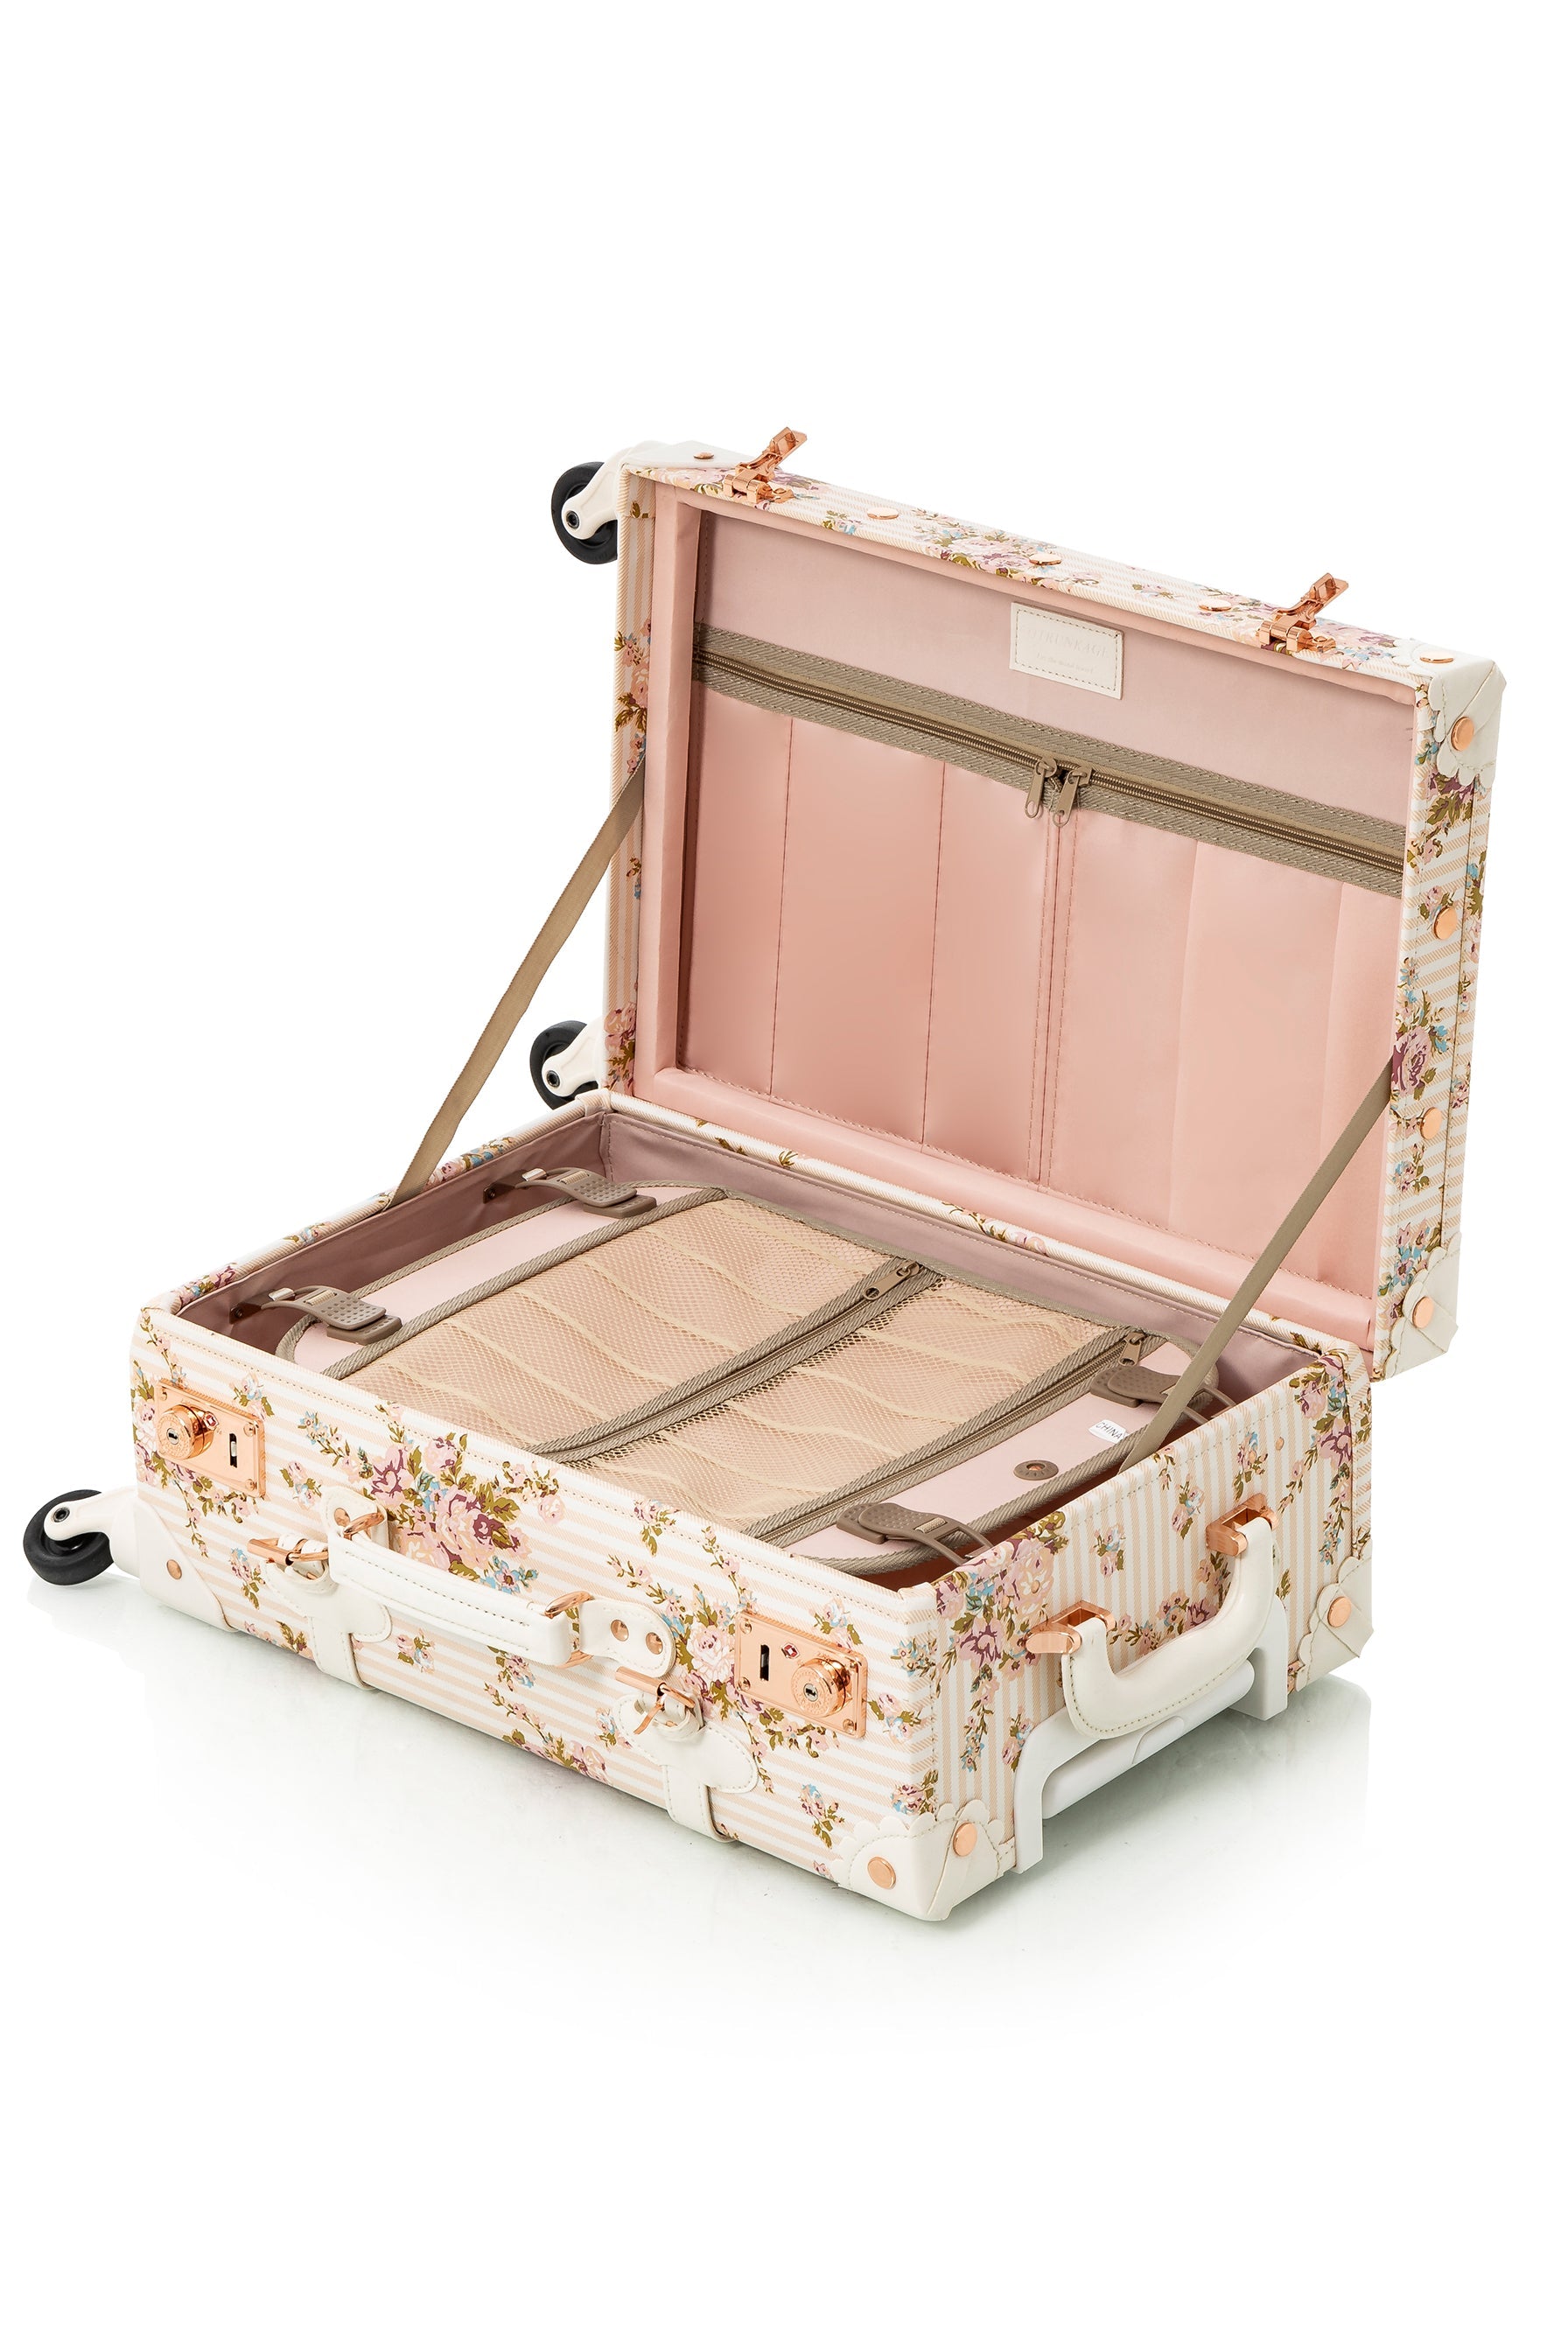 (United States) WildFloral 3 Pieces Set - Beige Floral's